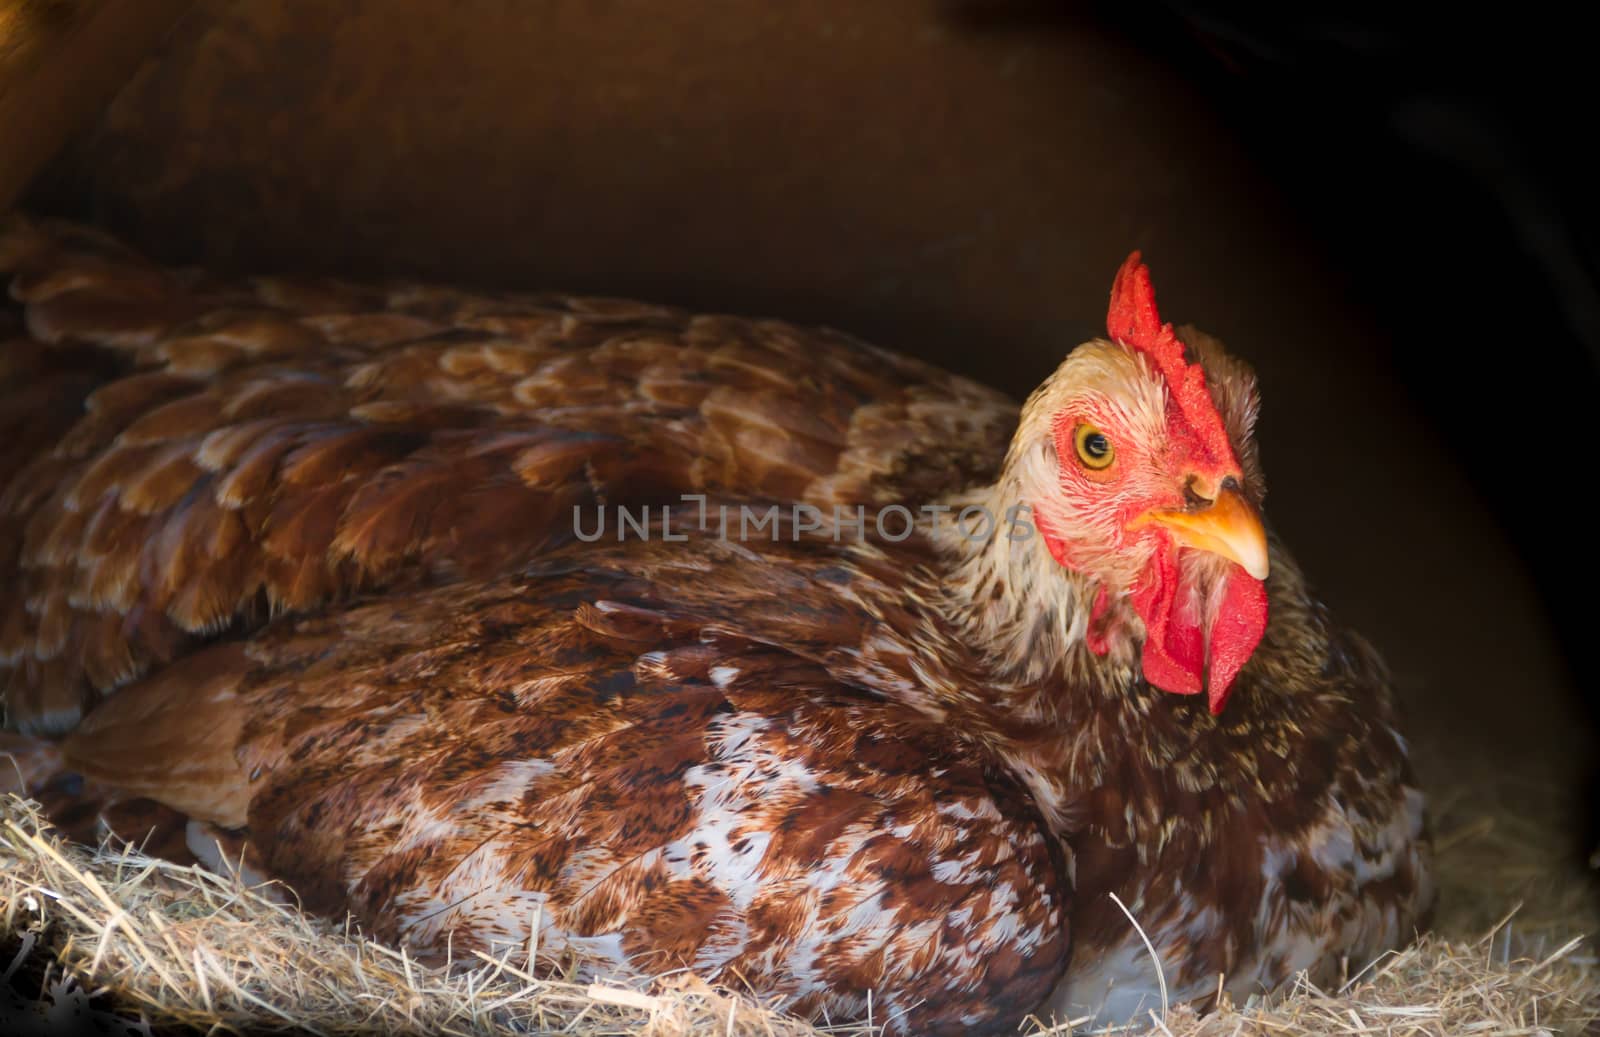 broody hen brooding in the nest of the farm by GabrielaBertolini